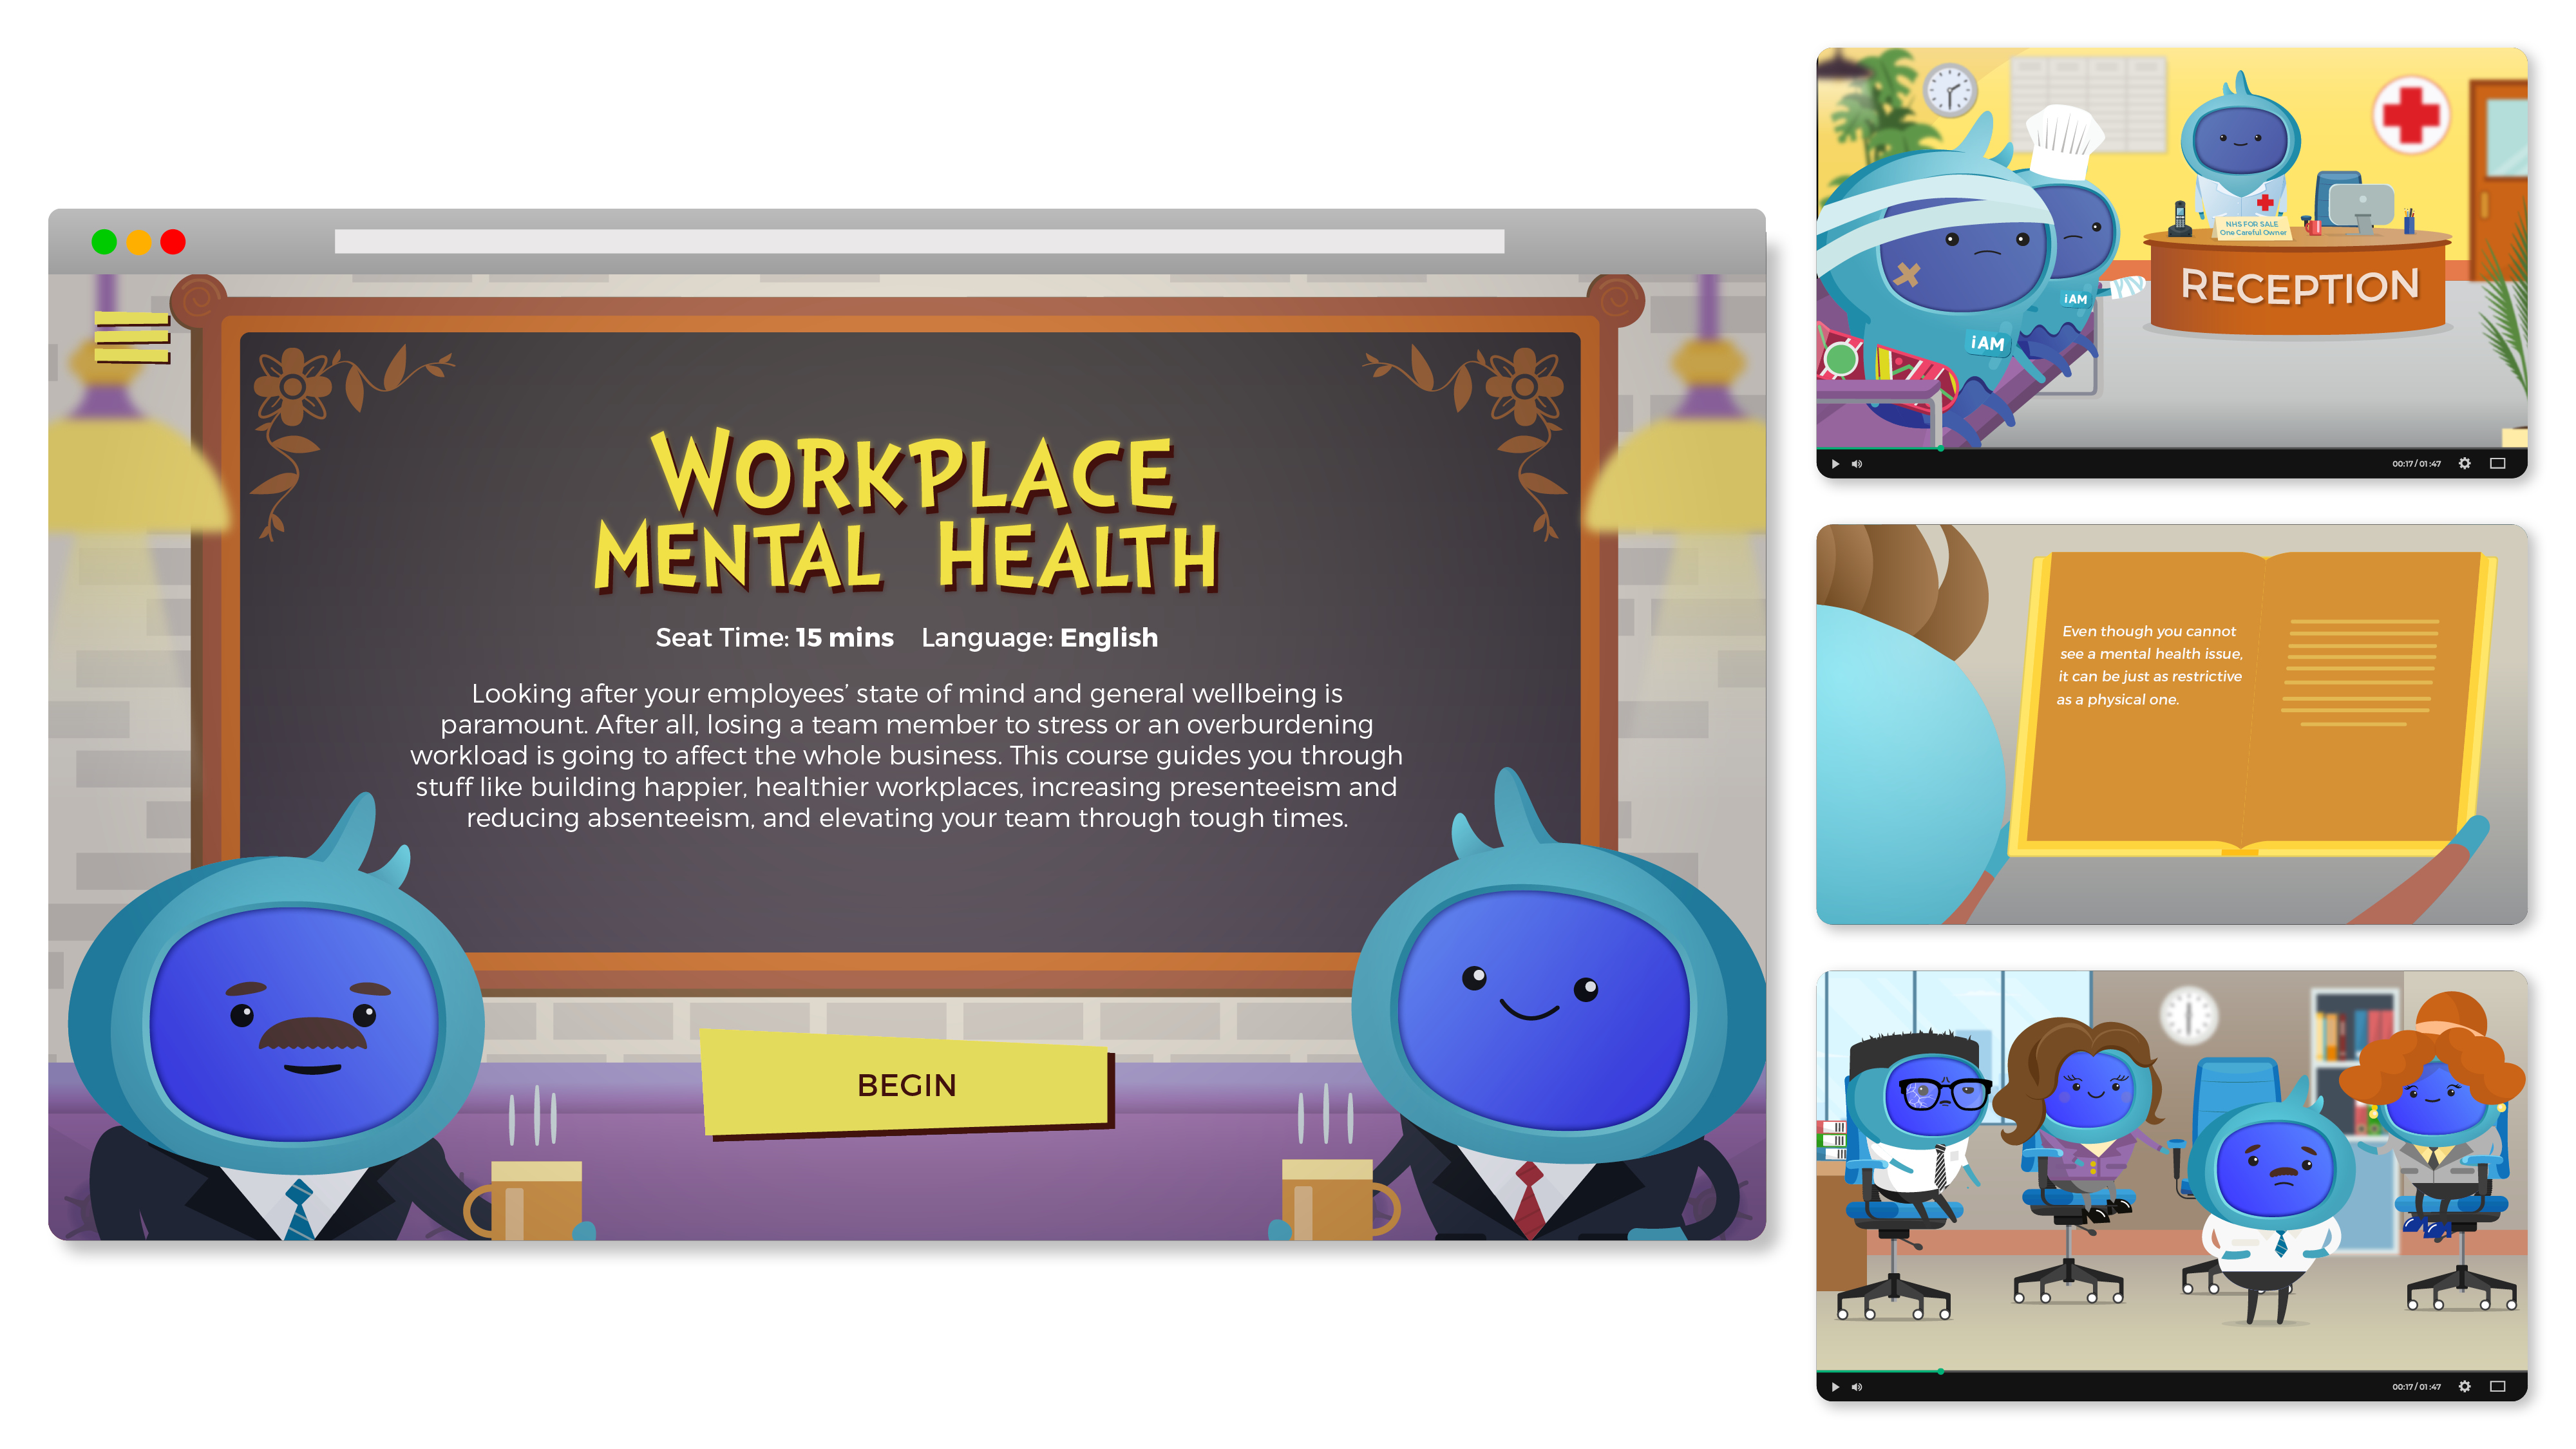 Workplace Mental Health - Landing pages image